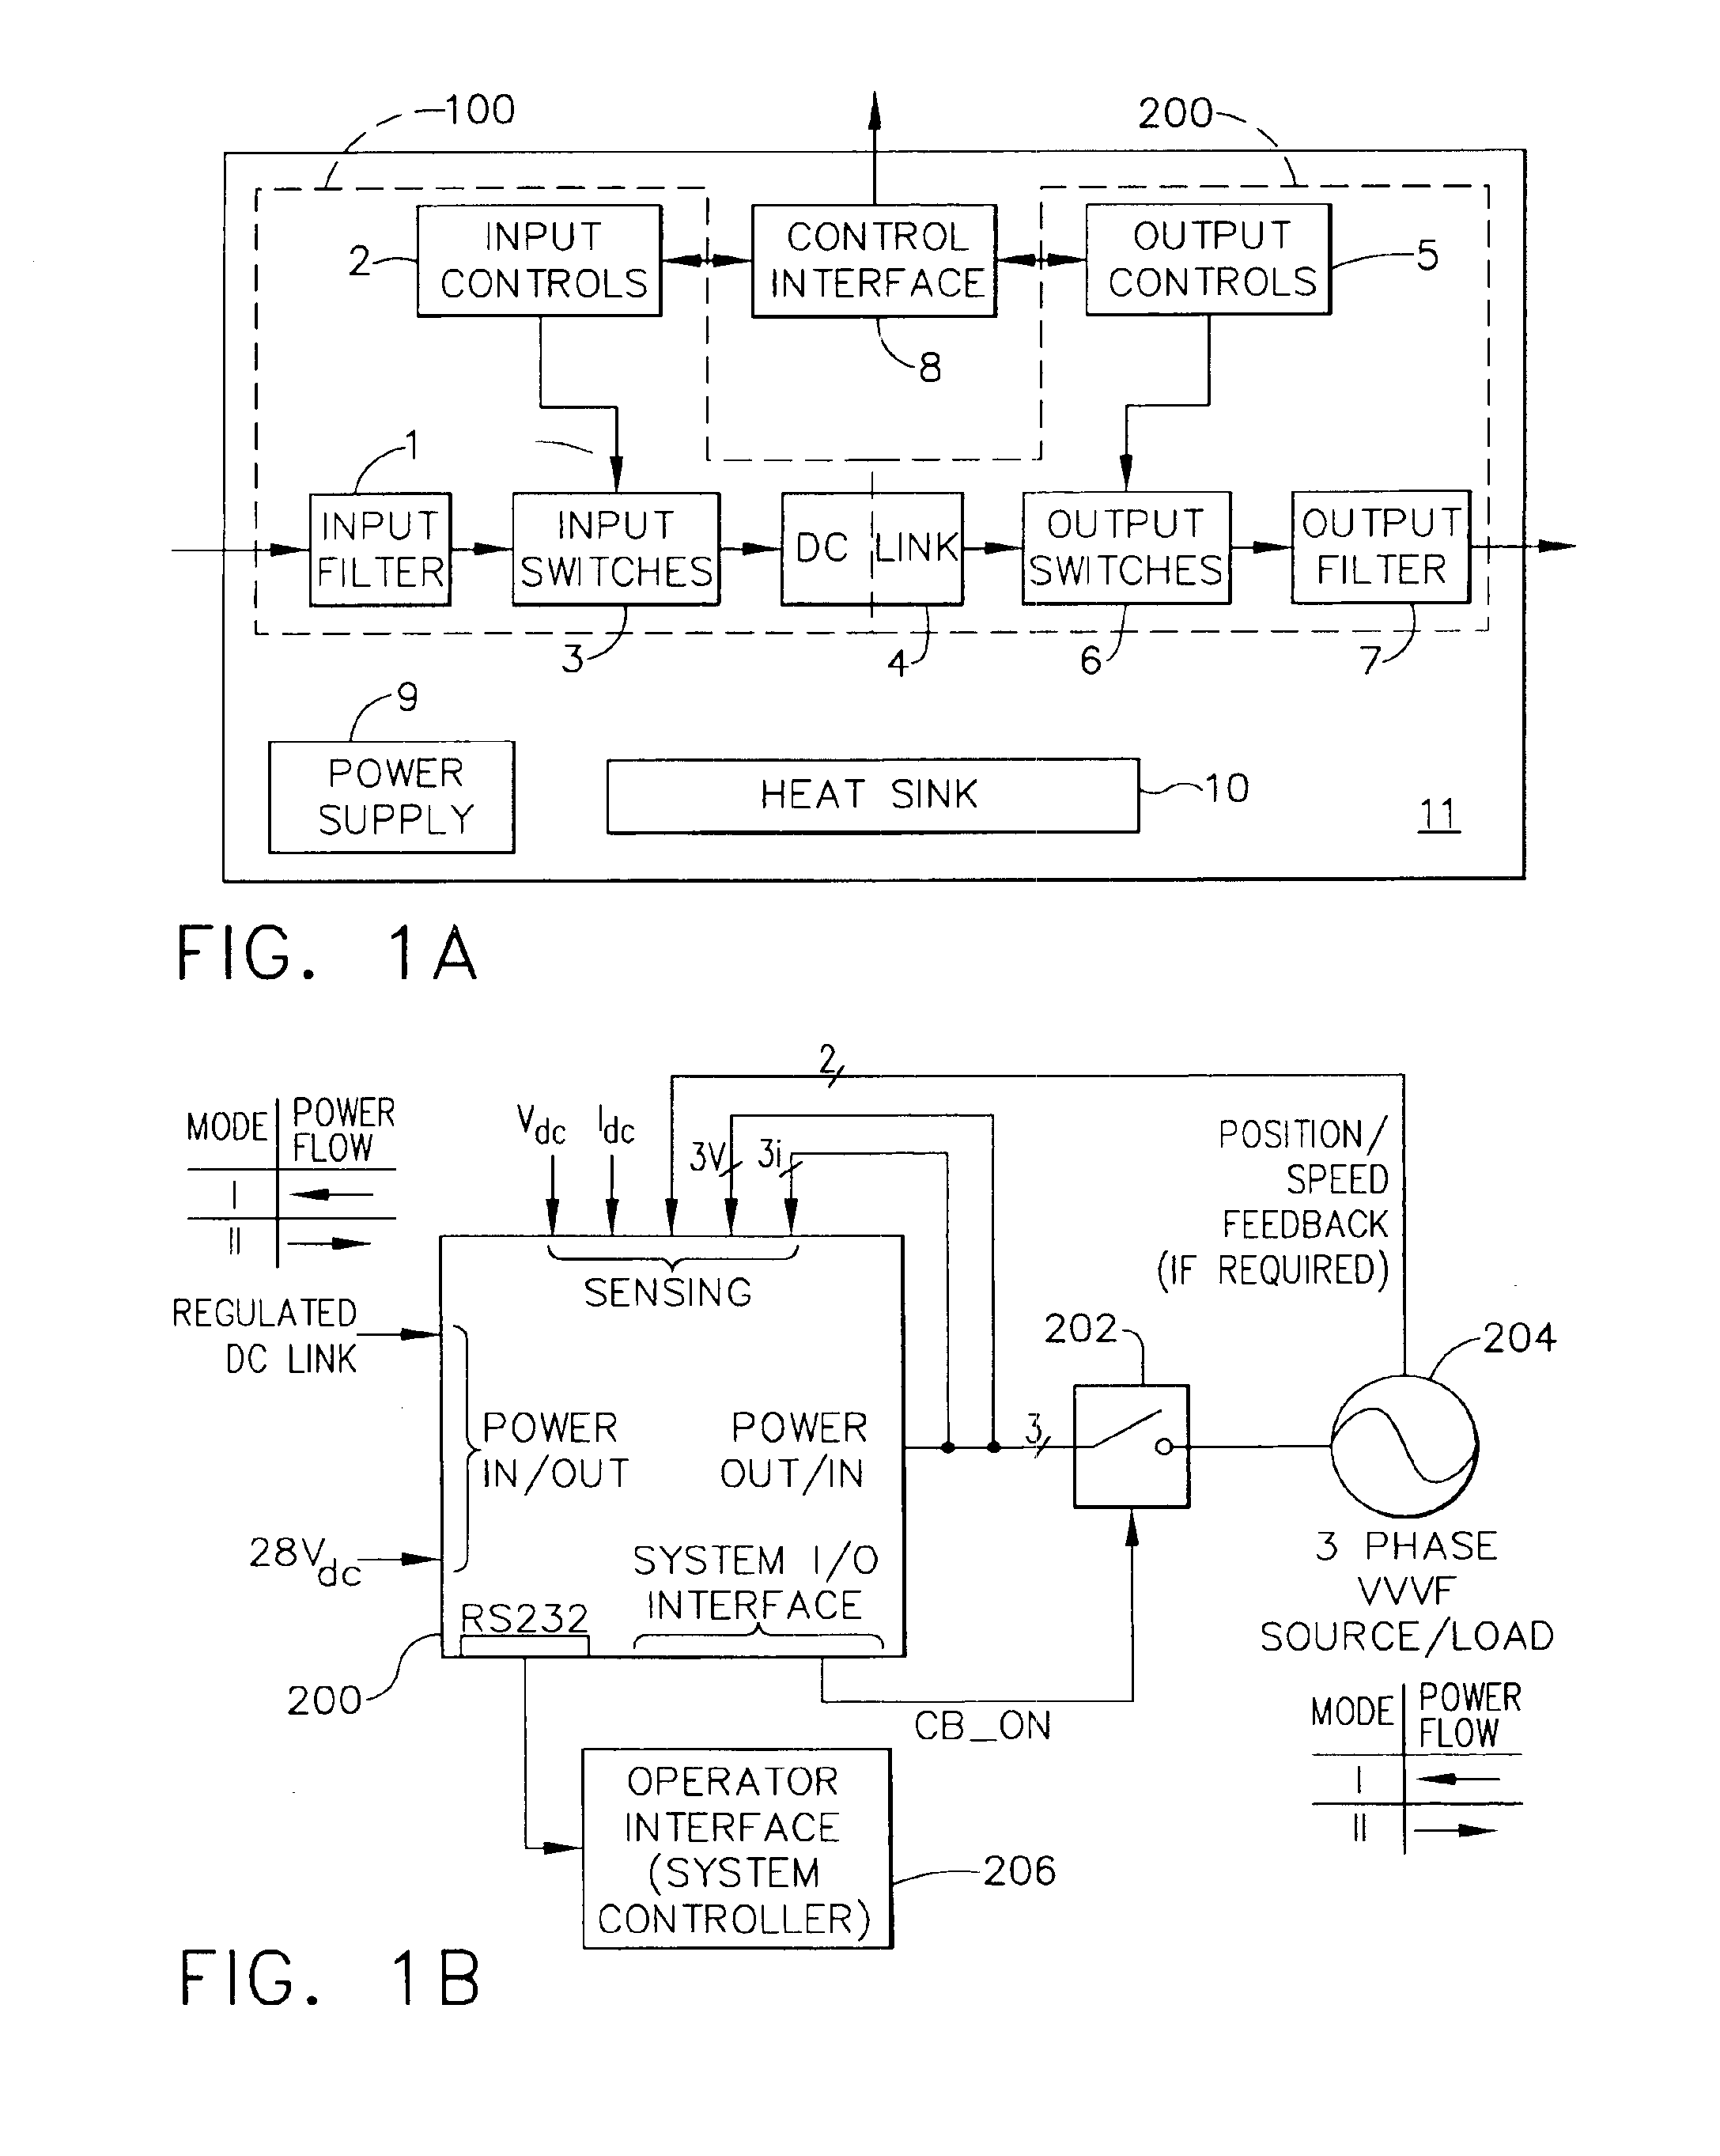 Synchronous and bi-directional variable frequency power conversion systems